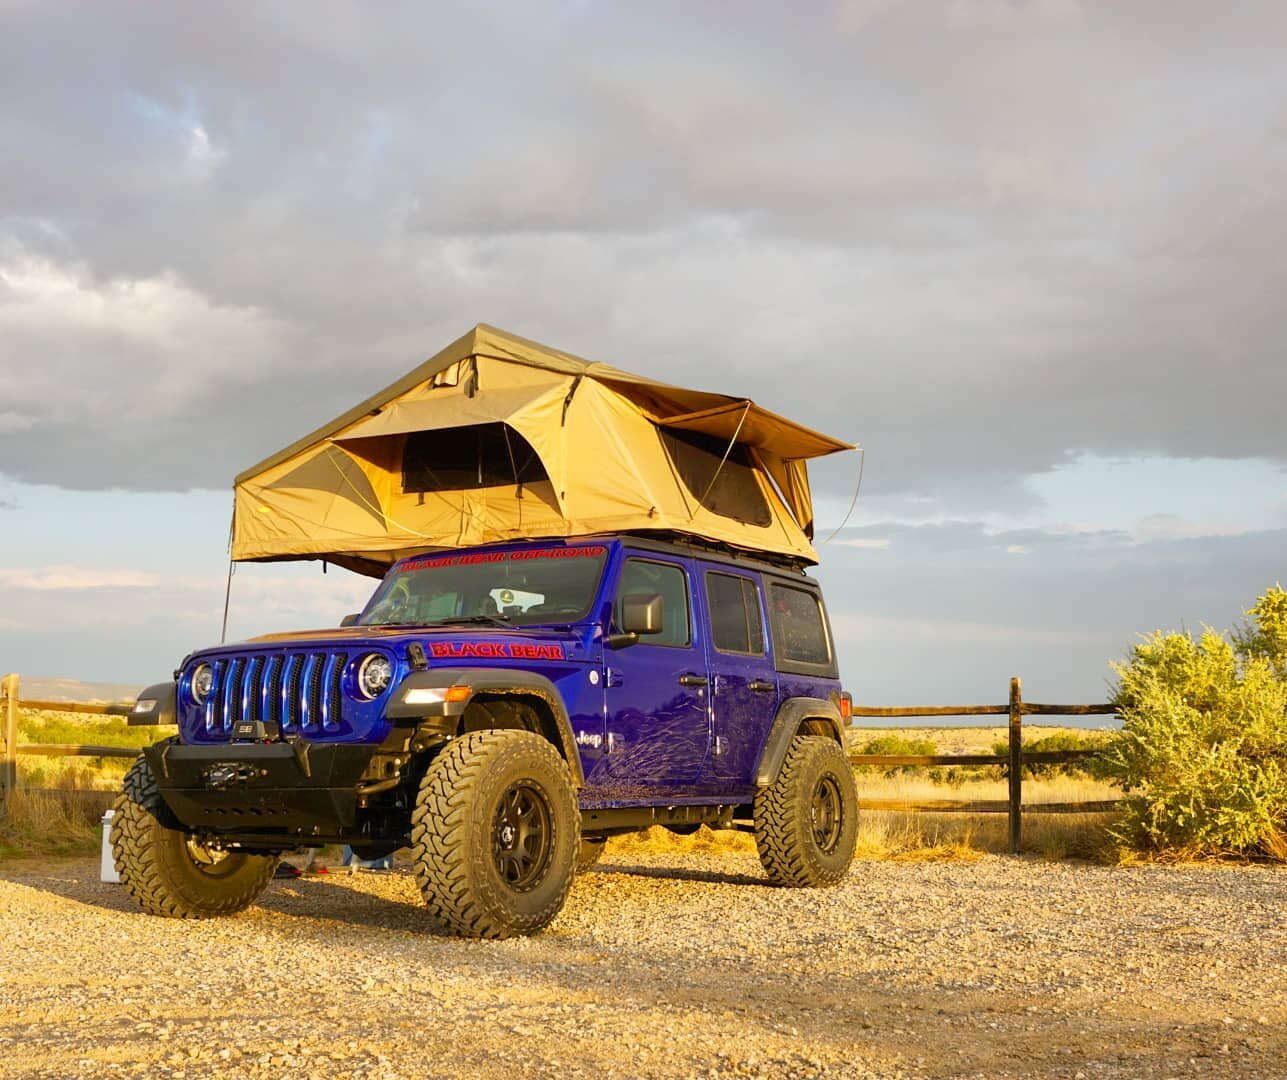 What's a dream trip for your 4x4 Rig? 

#dreambig #explore #overland #rooftoptent #nomad #jeeplove #jeepwrangler #wranglerjeep